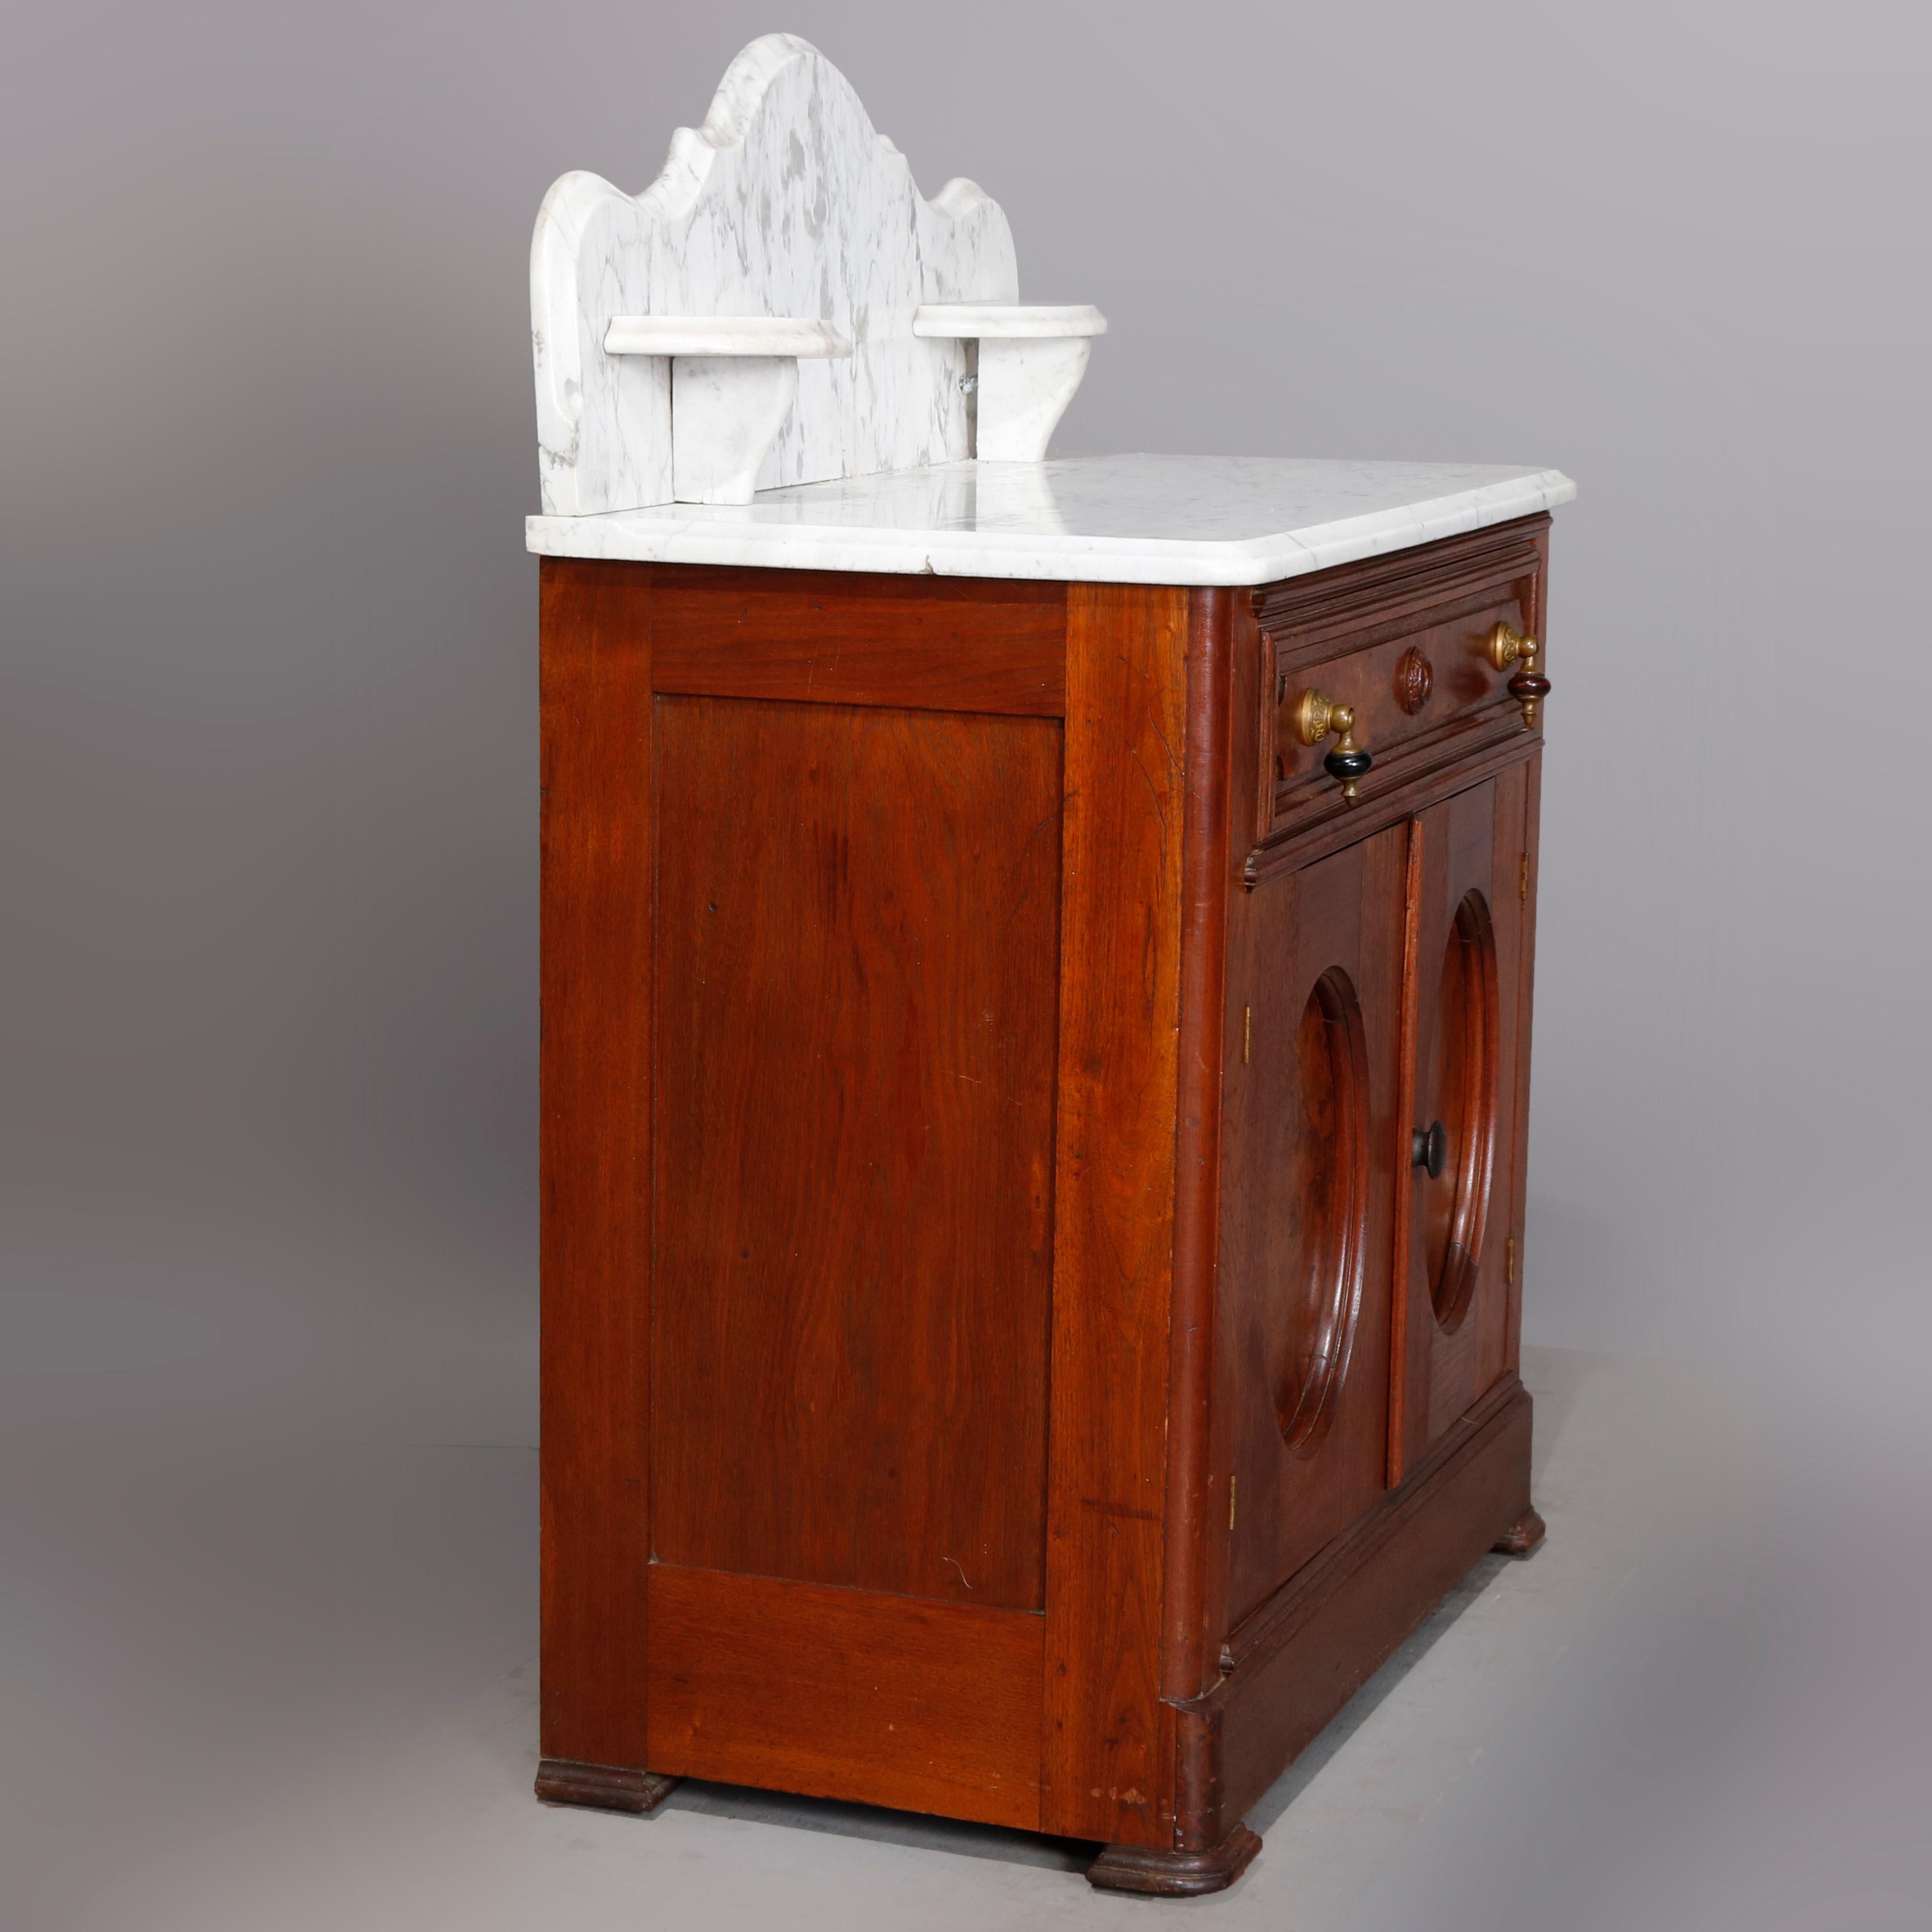 An antique Victorian washstand offers beveled marble-top with shaped backsplash having candle stands surmounting walnut and burl case with frieze drawer and double door lower cabinet, circa 1880

***DELIVERY NOTICE – Due to COVID-19 we are employing